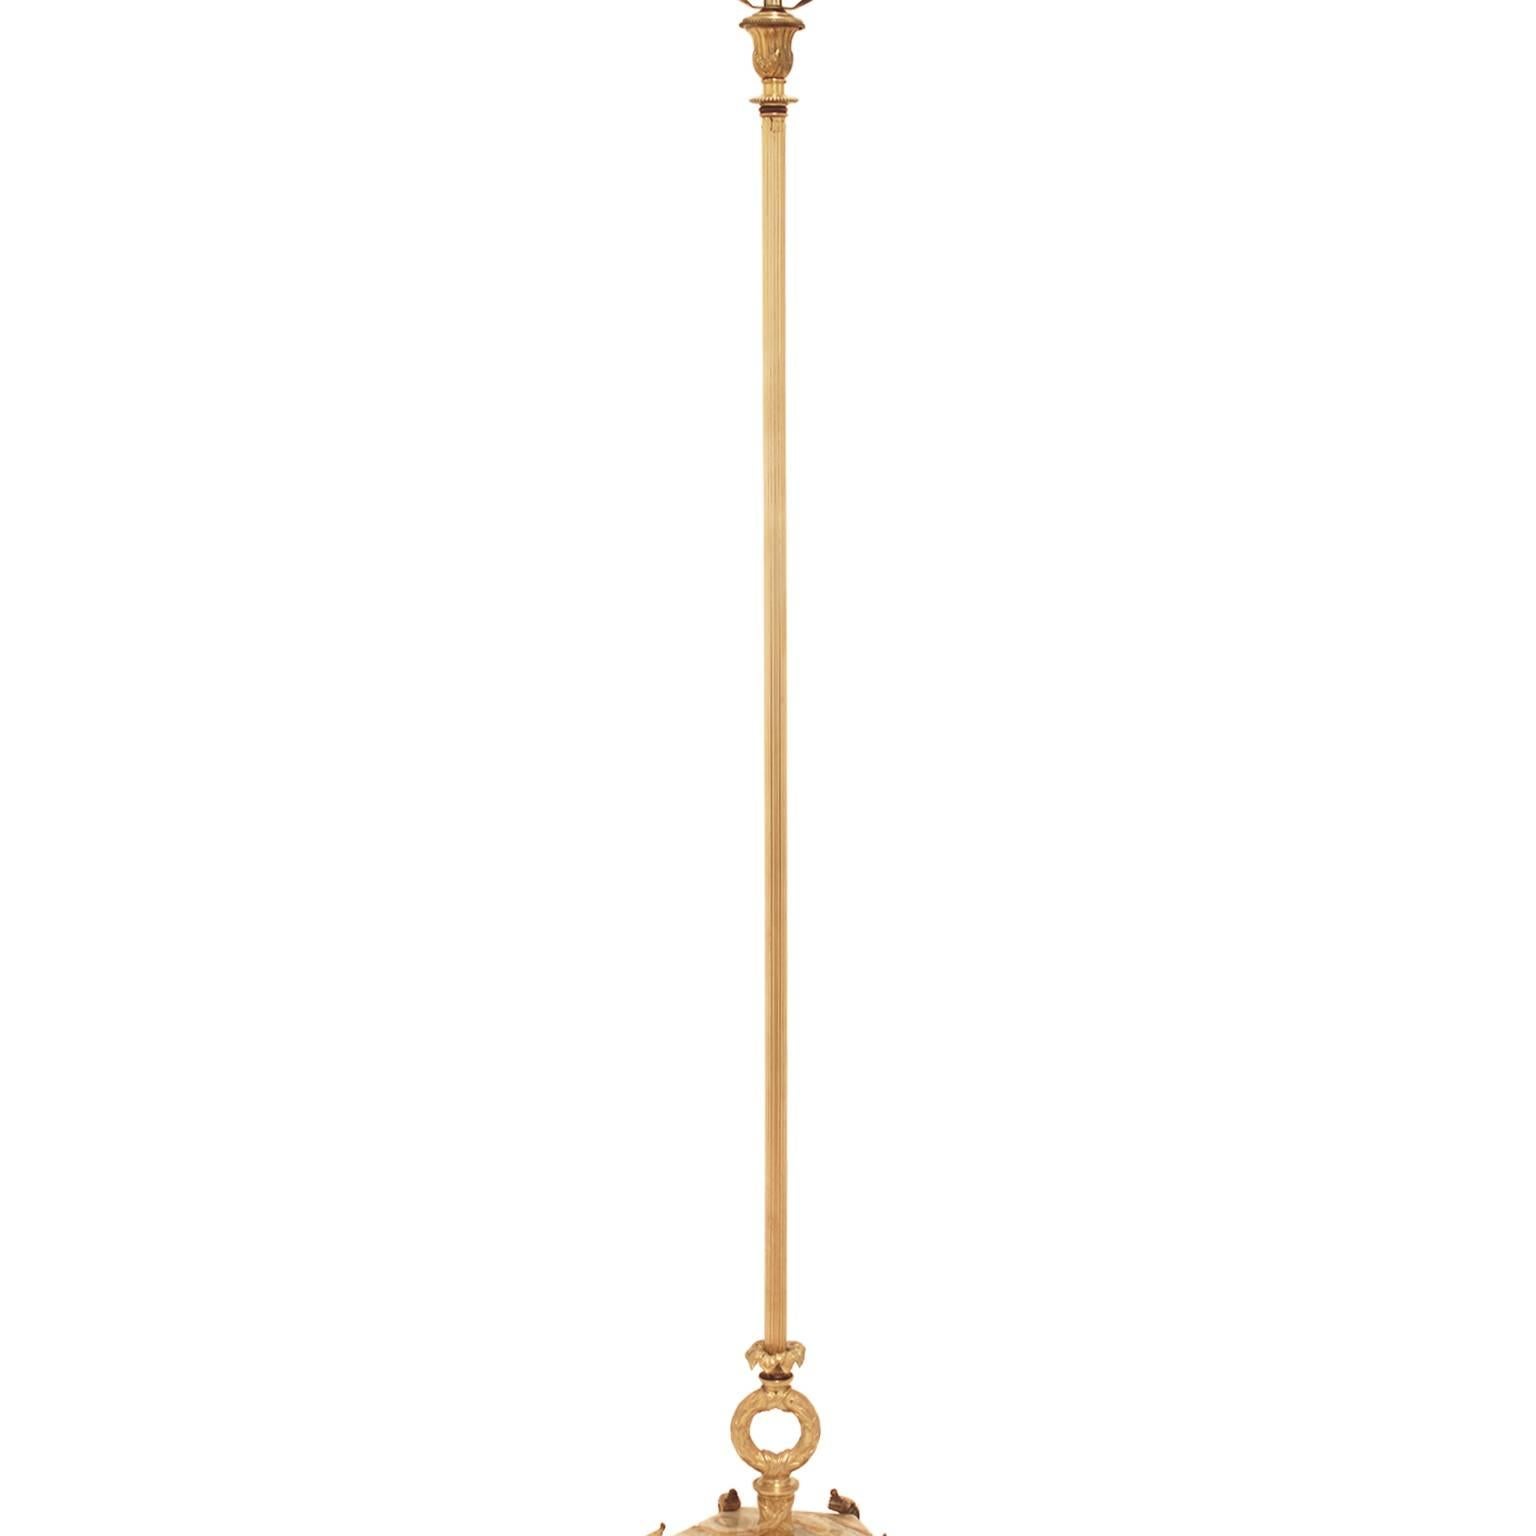 1920s French Claw Foot Brass Floor Lamp with Marble Base In Excellent Condition For Sale In New York, NY